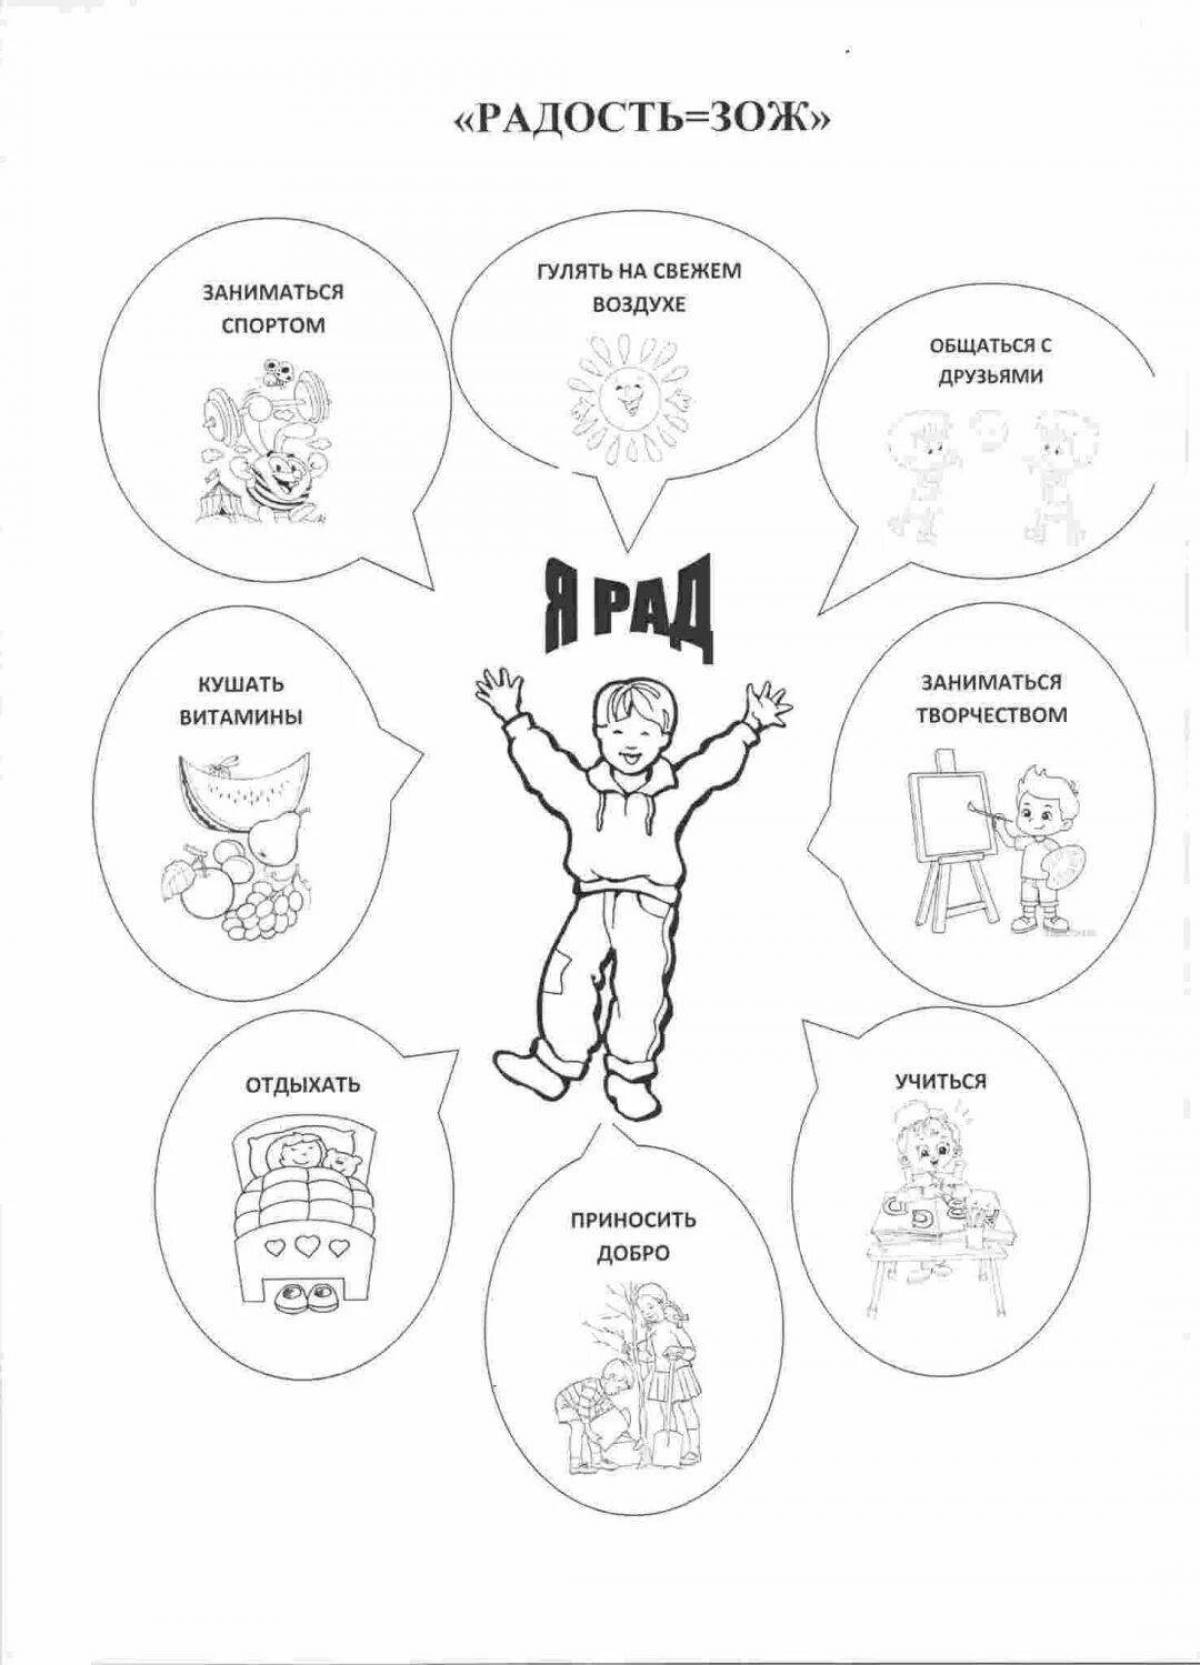 Coloring page promoting health education